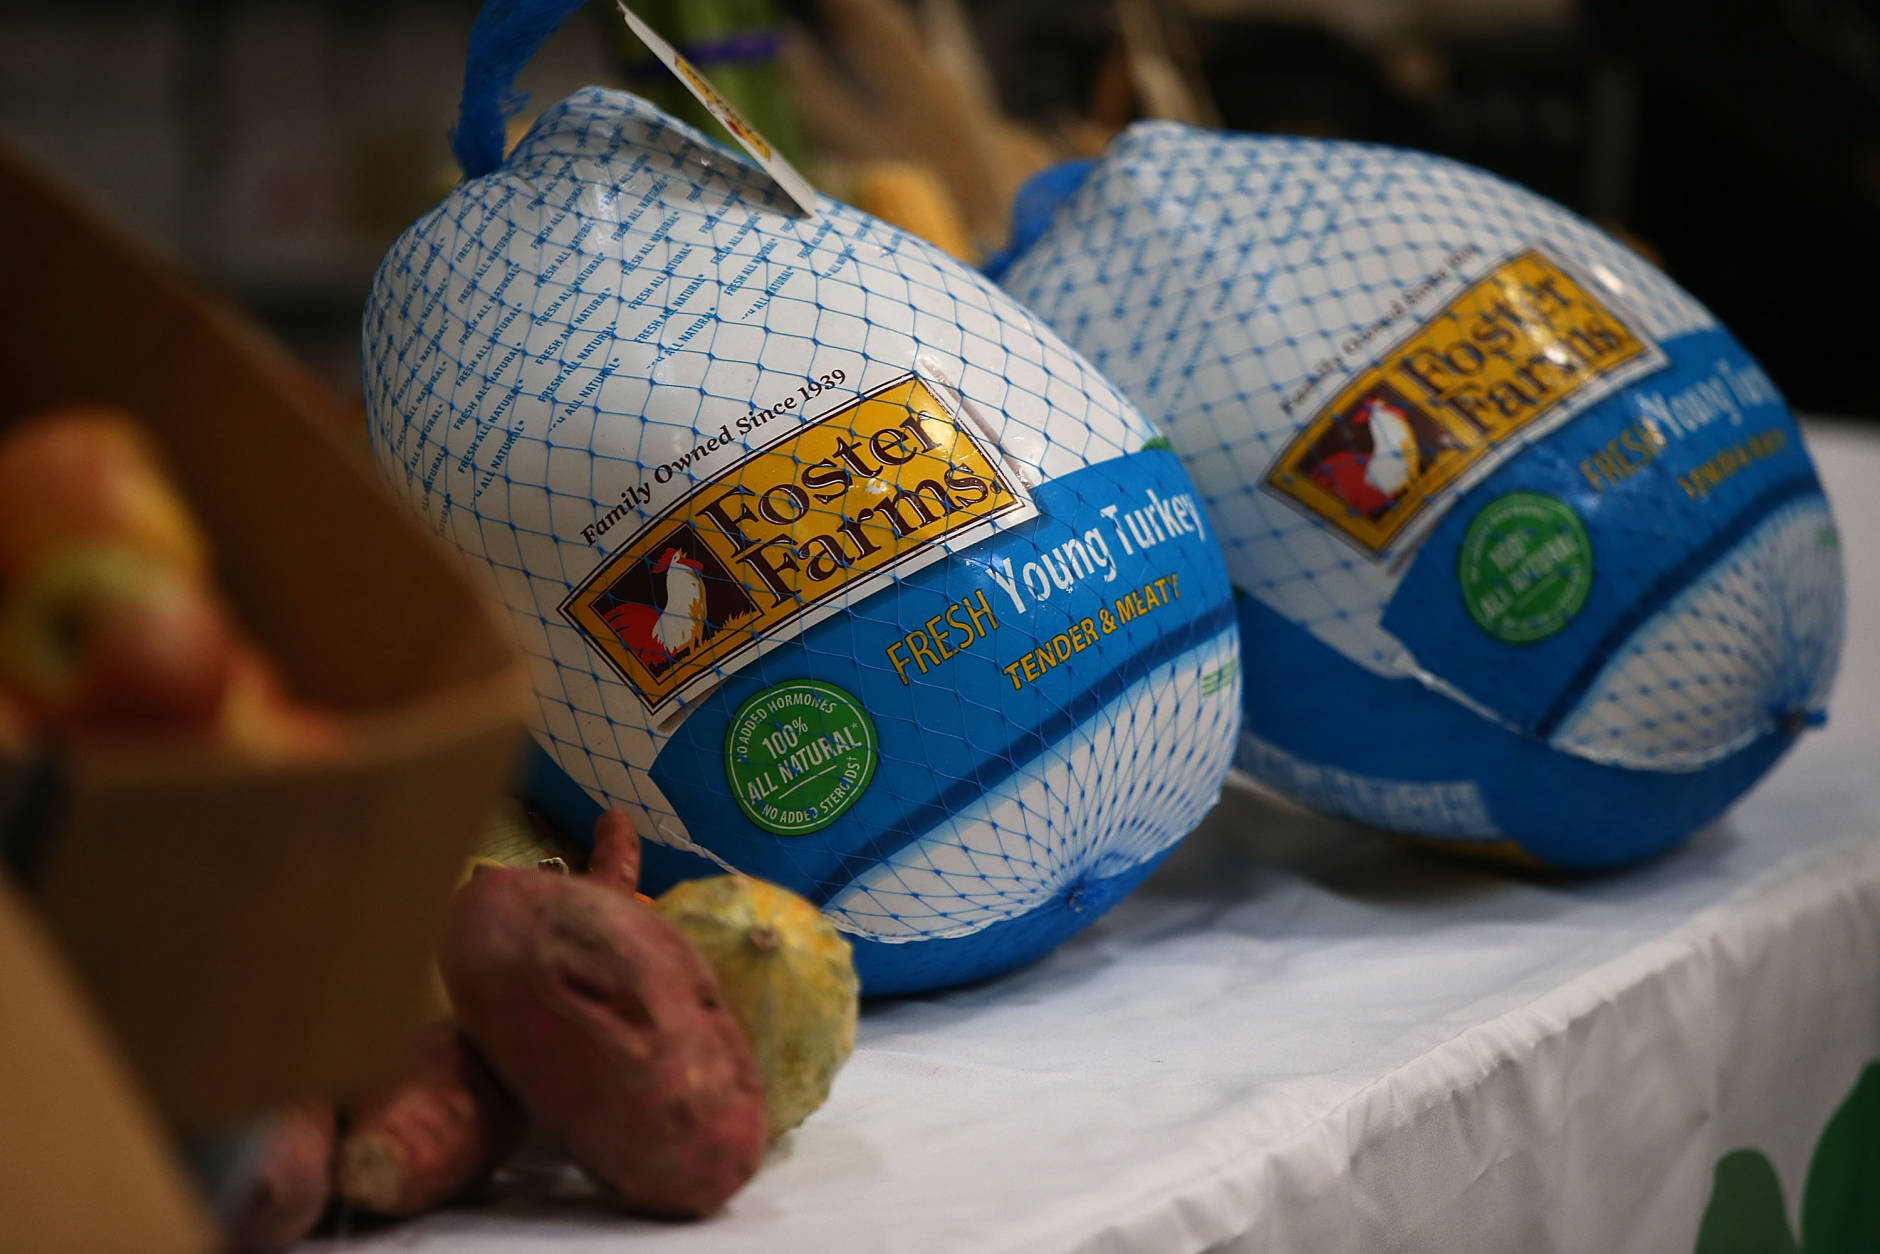 SAN FRANCISCO, CA - NOVEMBER 13:  Two donated Foster Farms turkeys are displayed on a table at the SF-Marin Food Bank on November 13, 2015 in San Francisco, California. Foster Farms donated 640 Thanksgiving turkeys to the SF-Marin Food Bank ahead of the Thanksgiving holiday.  (Photo by Justin Sullivan/Getty Images)